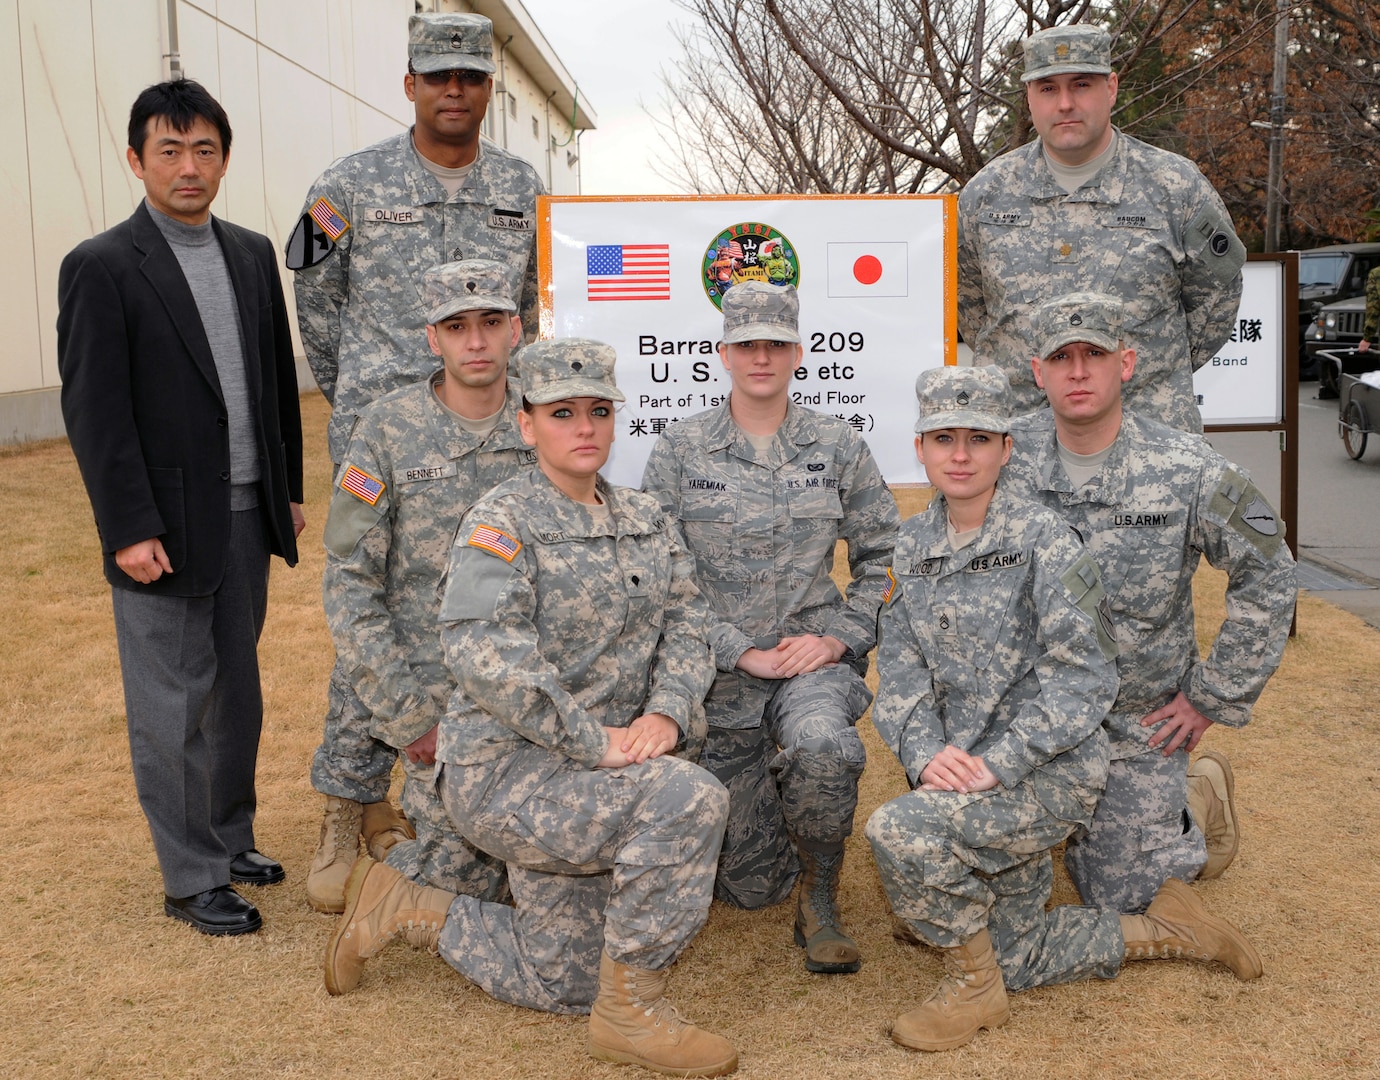 Members of the Yama Sakura 61's Public Affairs Office tell the stories of the personnel associated with the exercise. Members include: Mr. Hideo Kawada, Sgt. 1st Class Michael Oliver, Army Maj. Randall Baucom, Army Spc. Josh Bennett, Air Force Airman 1st Class Laura Yahemiak, Army Staff Sgt. Fredrick Varney, Army Spc. Brandy Mort and Army Staff Sgt. Rebecca Wood.